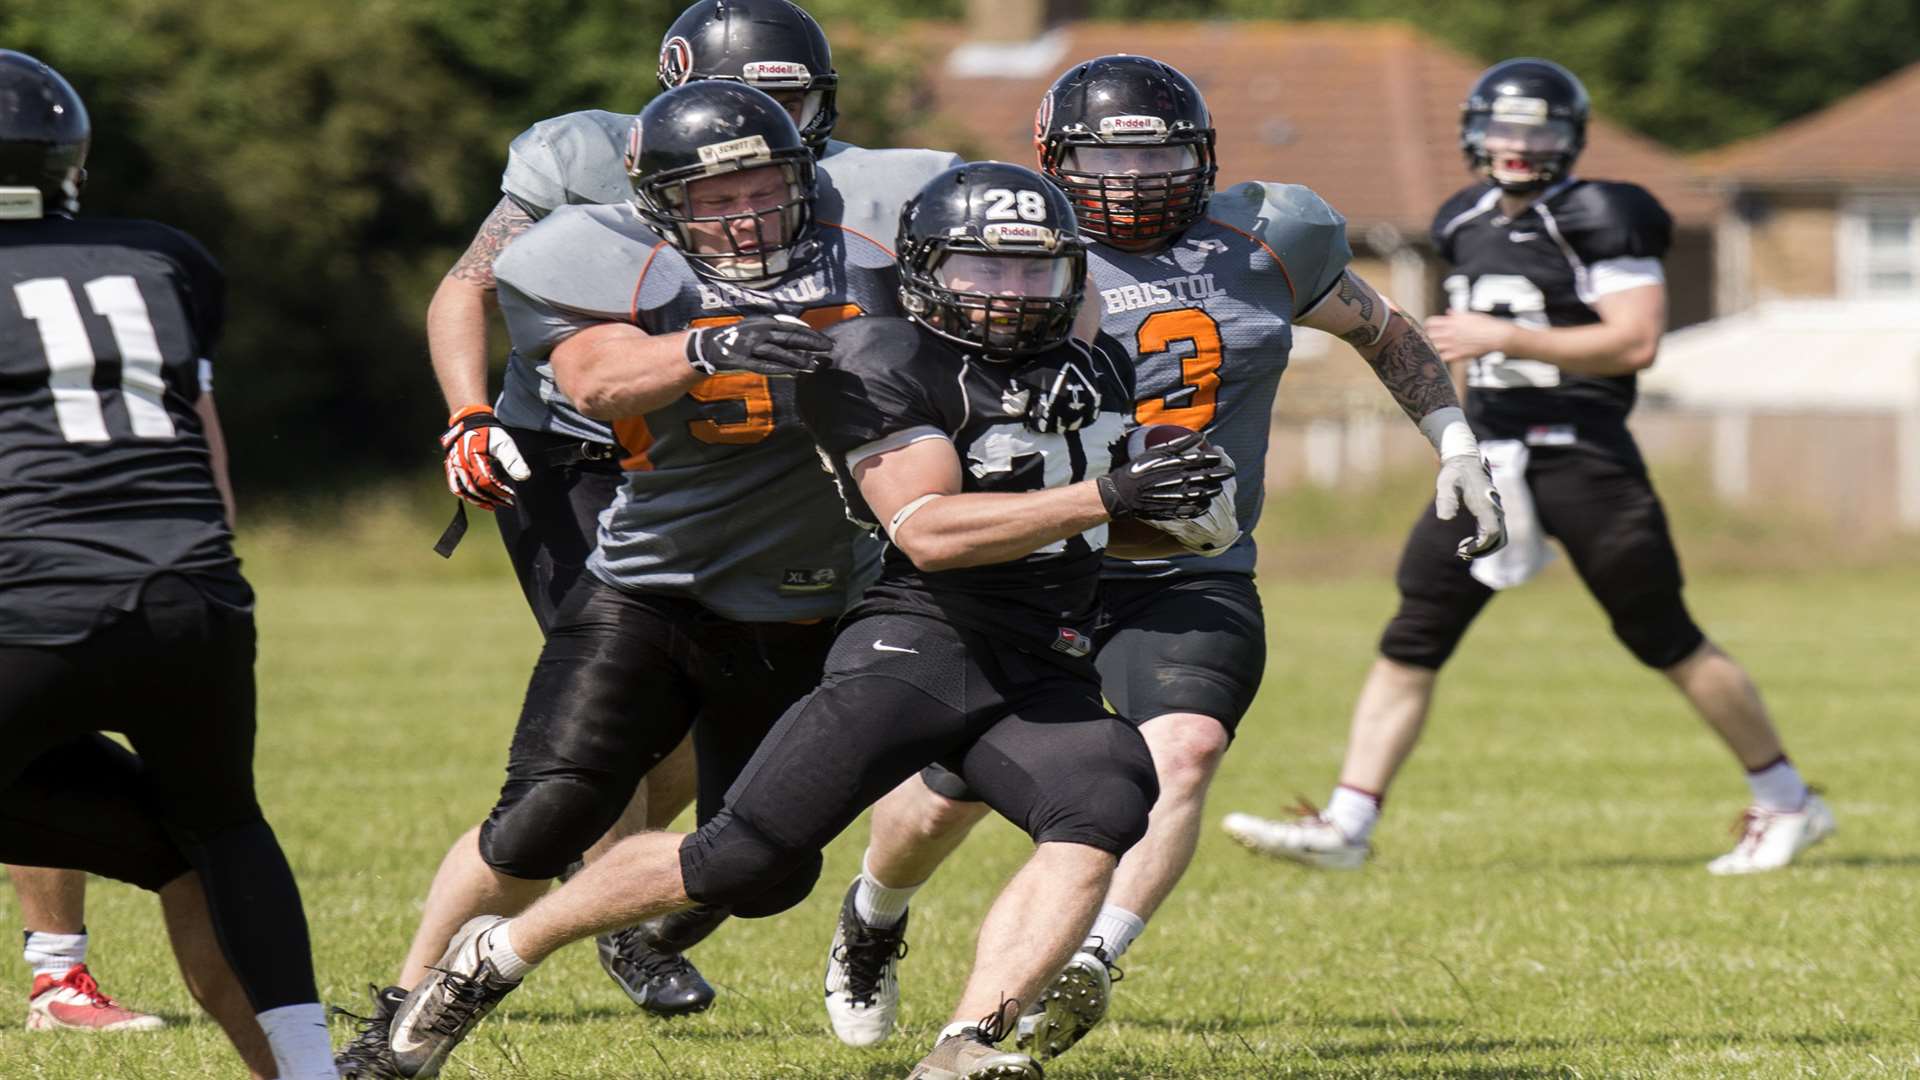 American football is growing in popularity in the UK. Picture: Ken Matcham